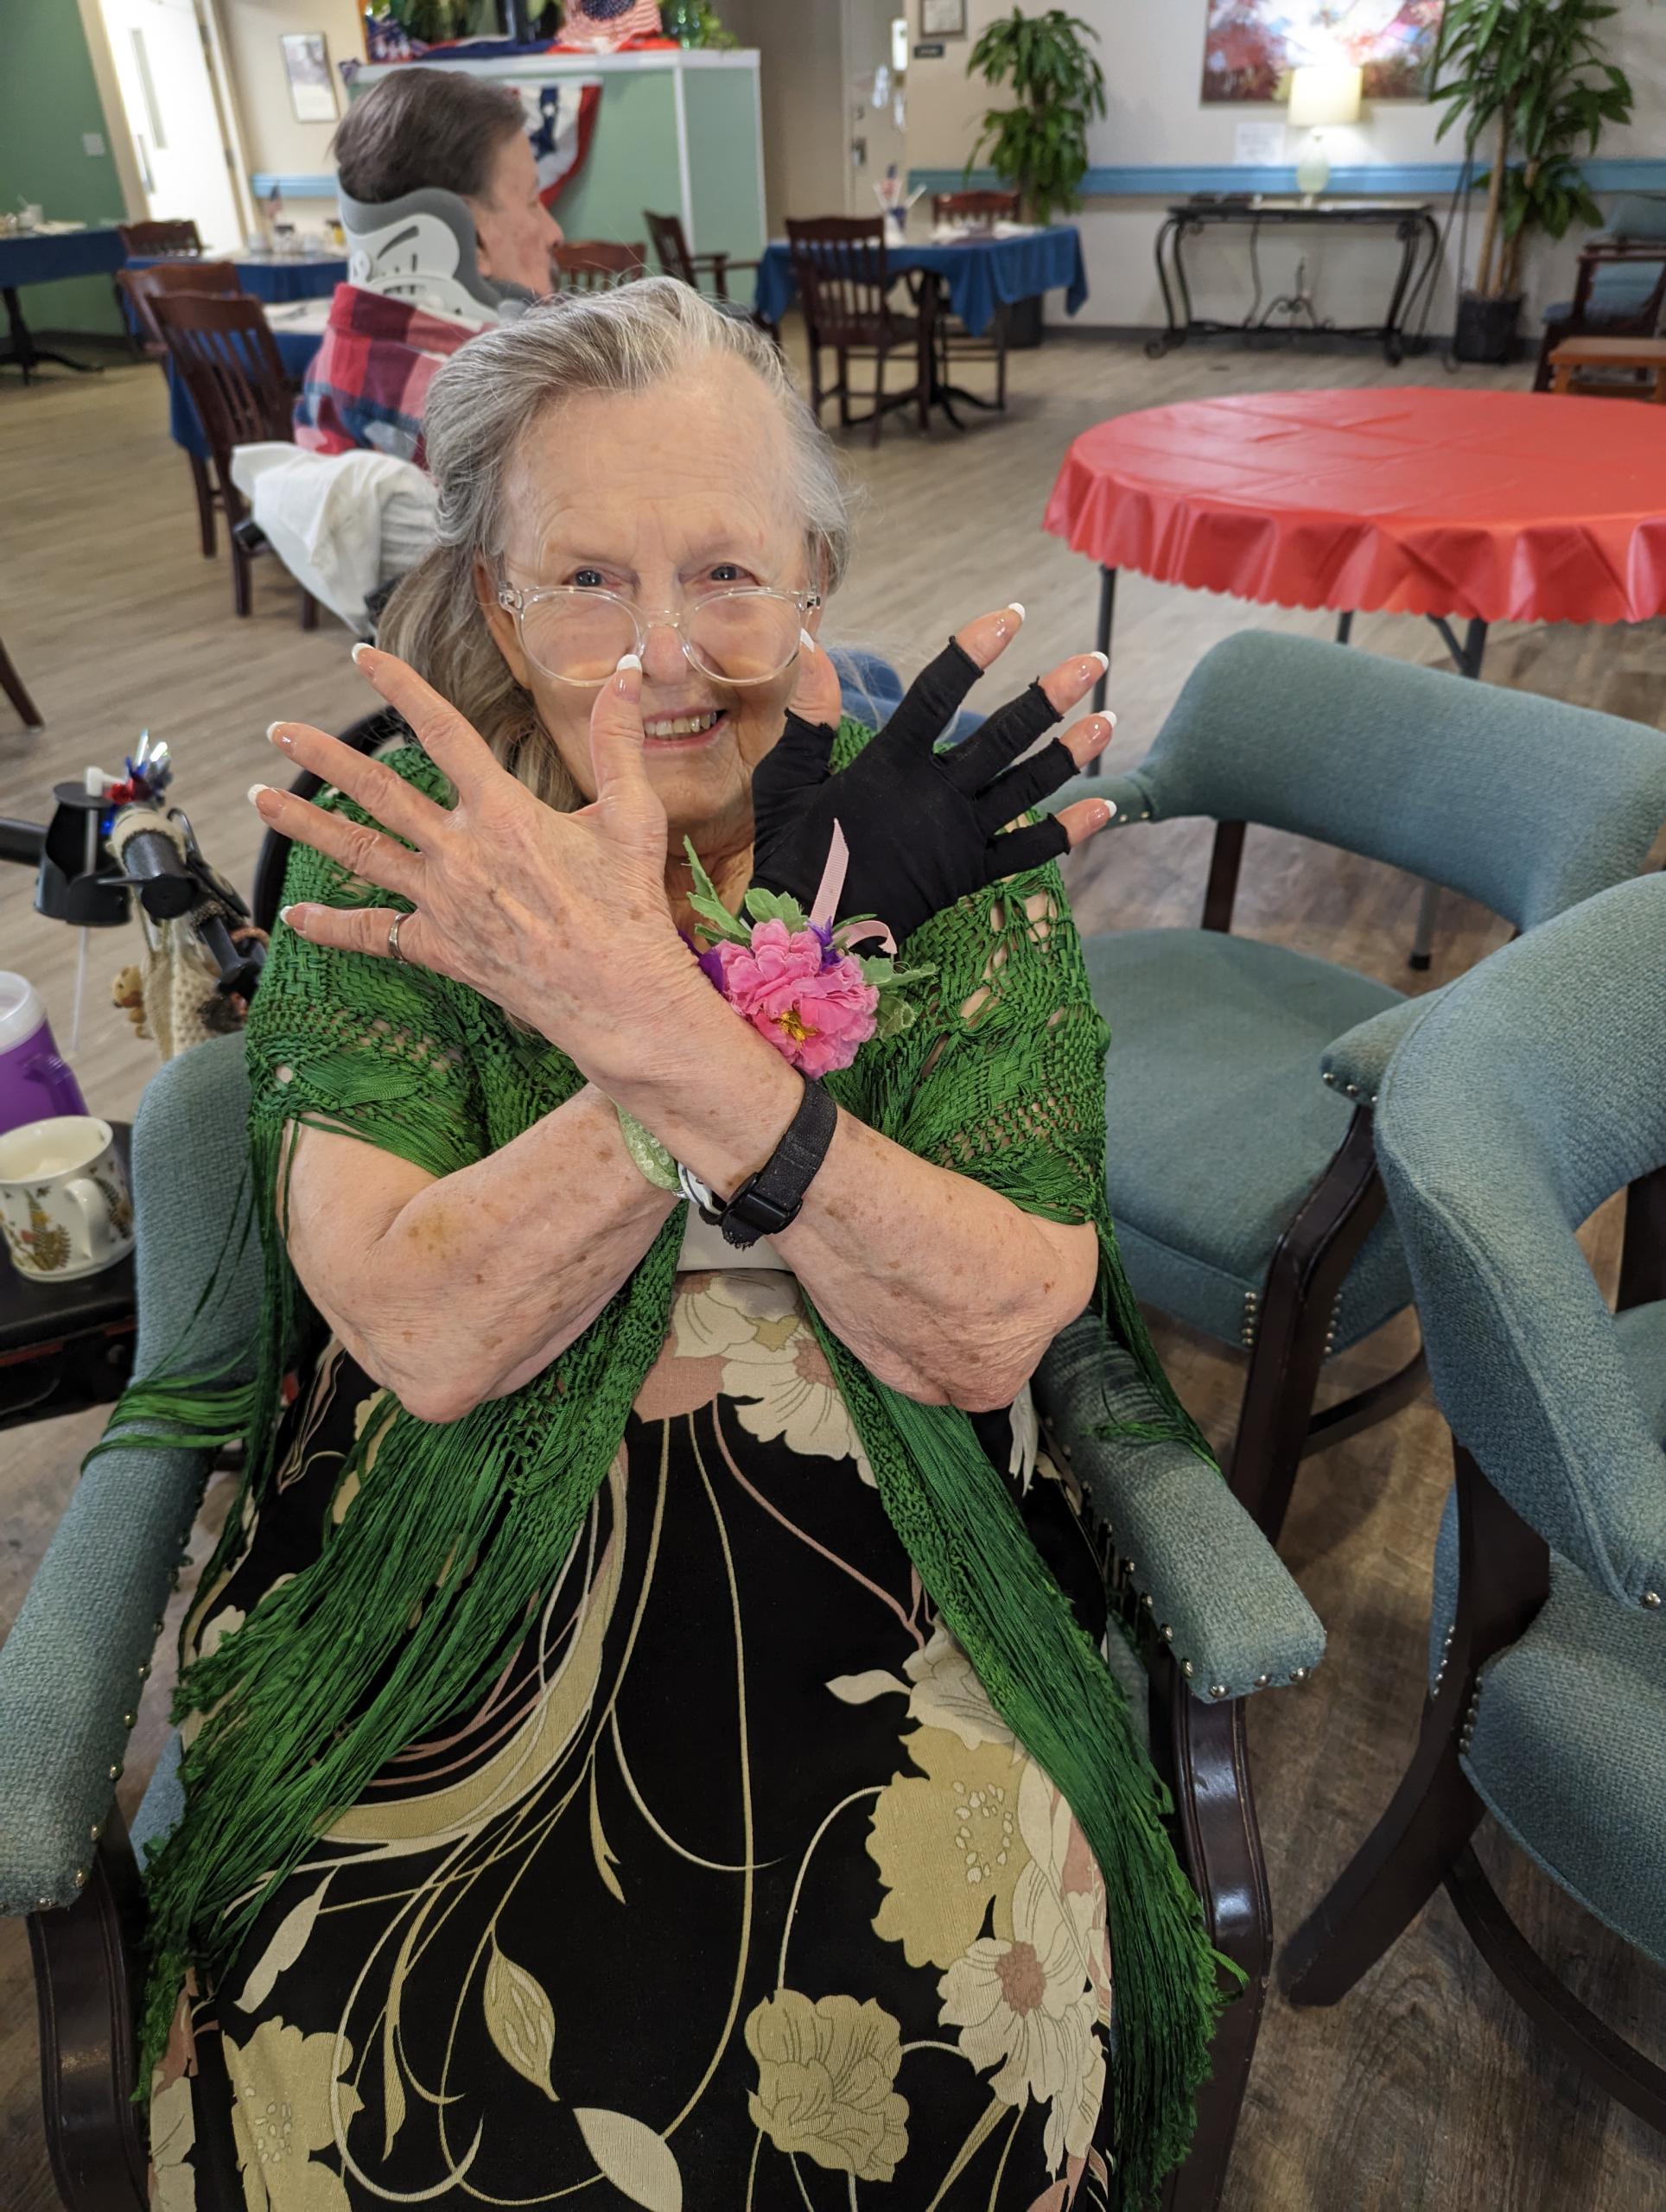 assisted living resident manicure showing her nails off